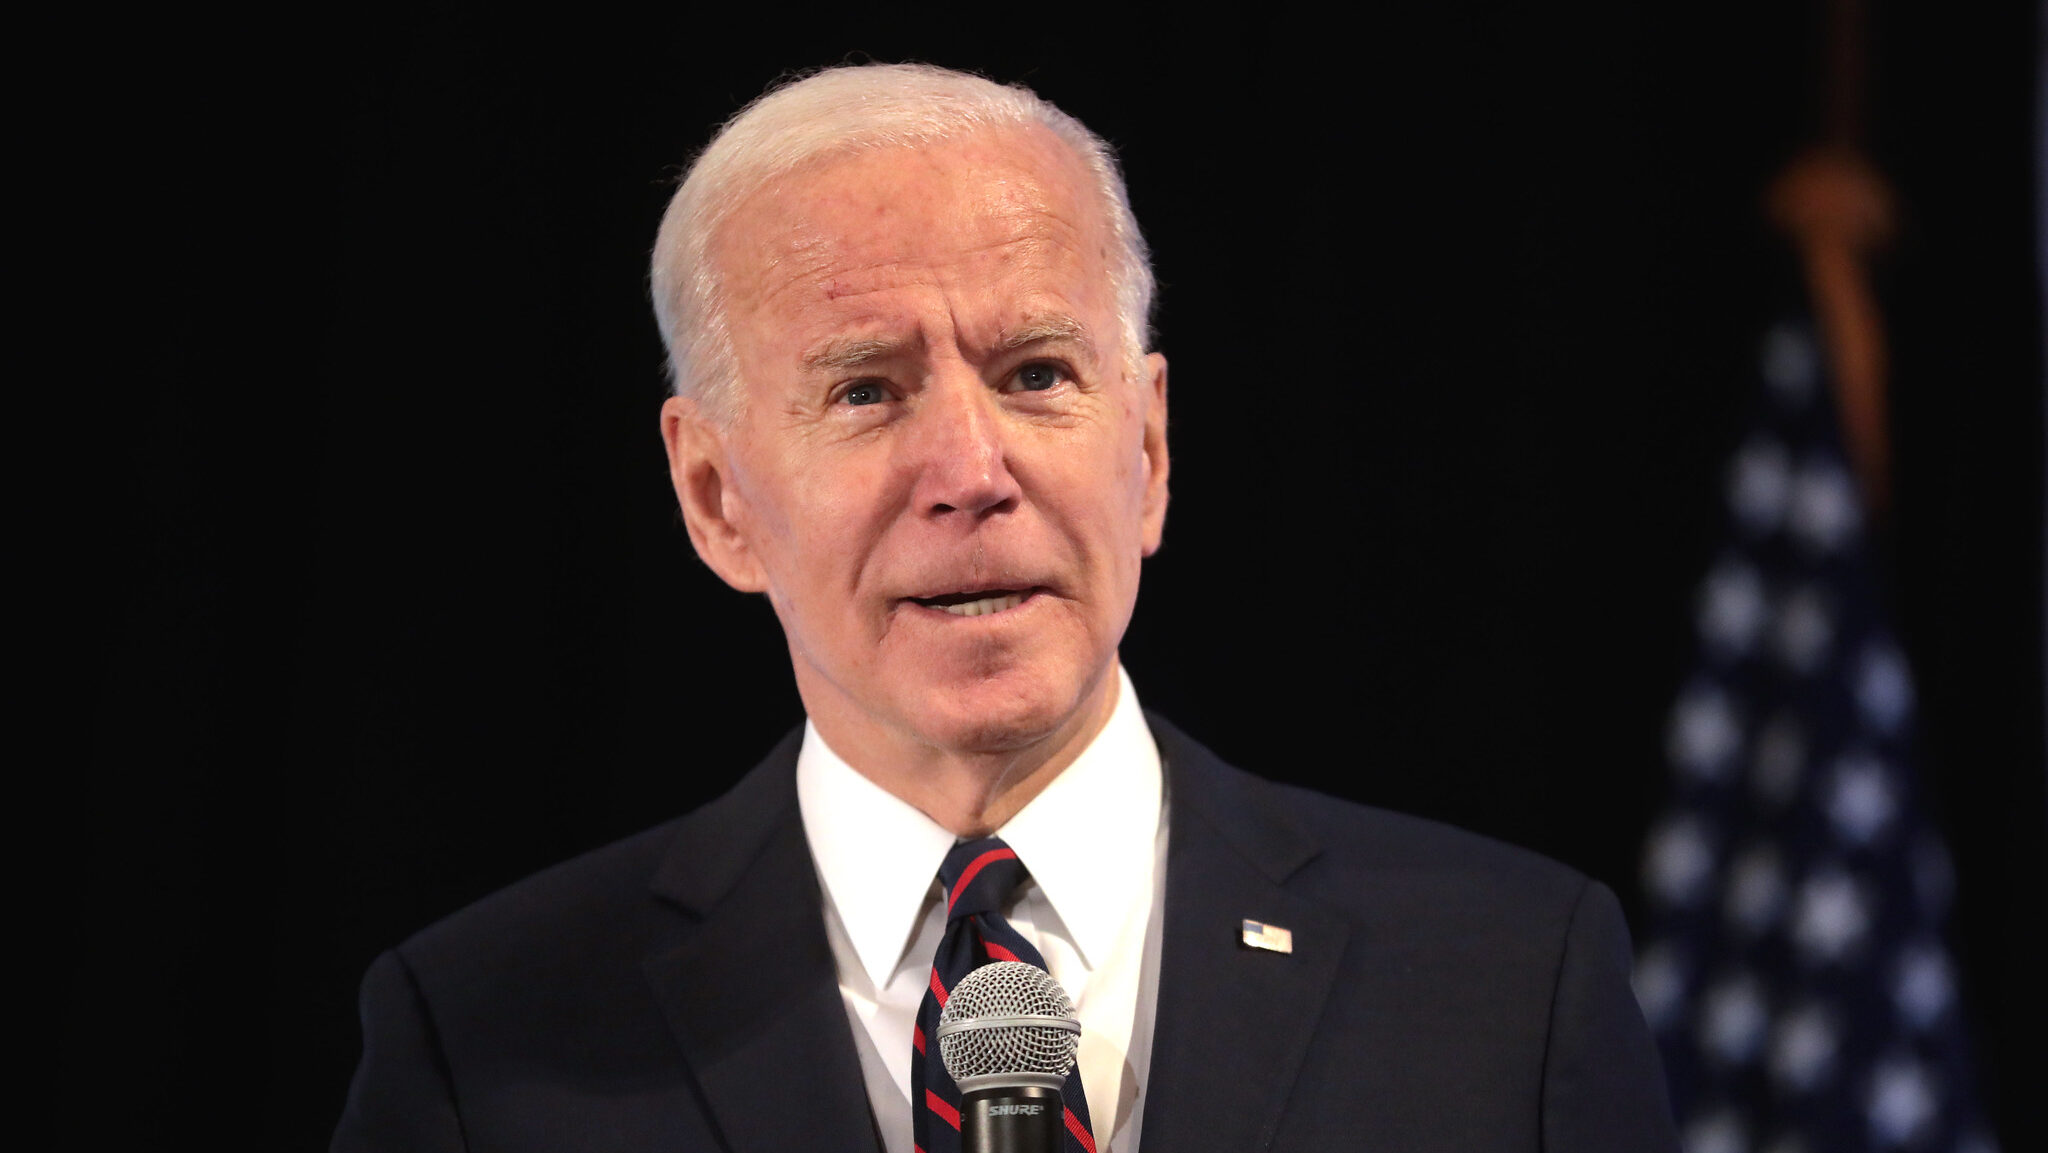 Americans Have A ‘Crisis Of Confidence’ In Biden. His Angry State Of The Union Speech Didn’t Help